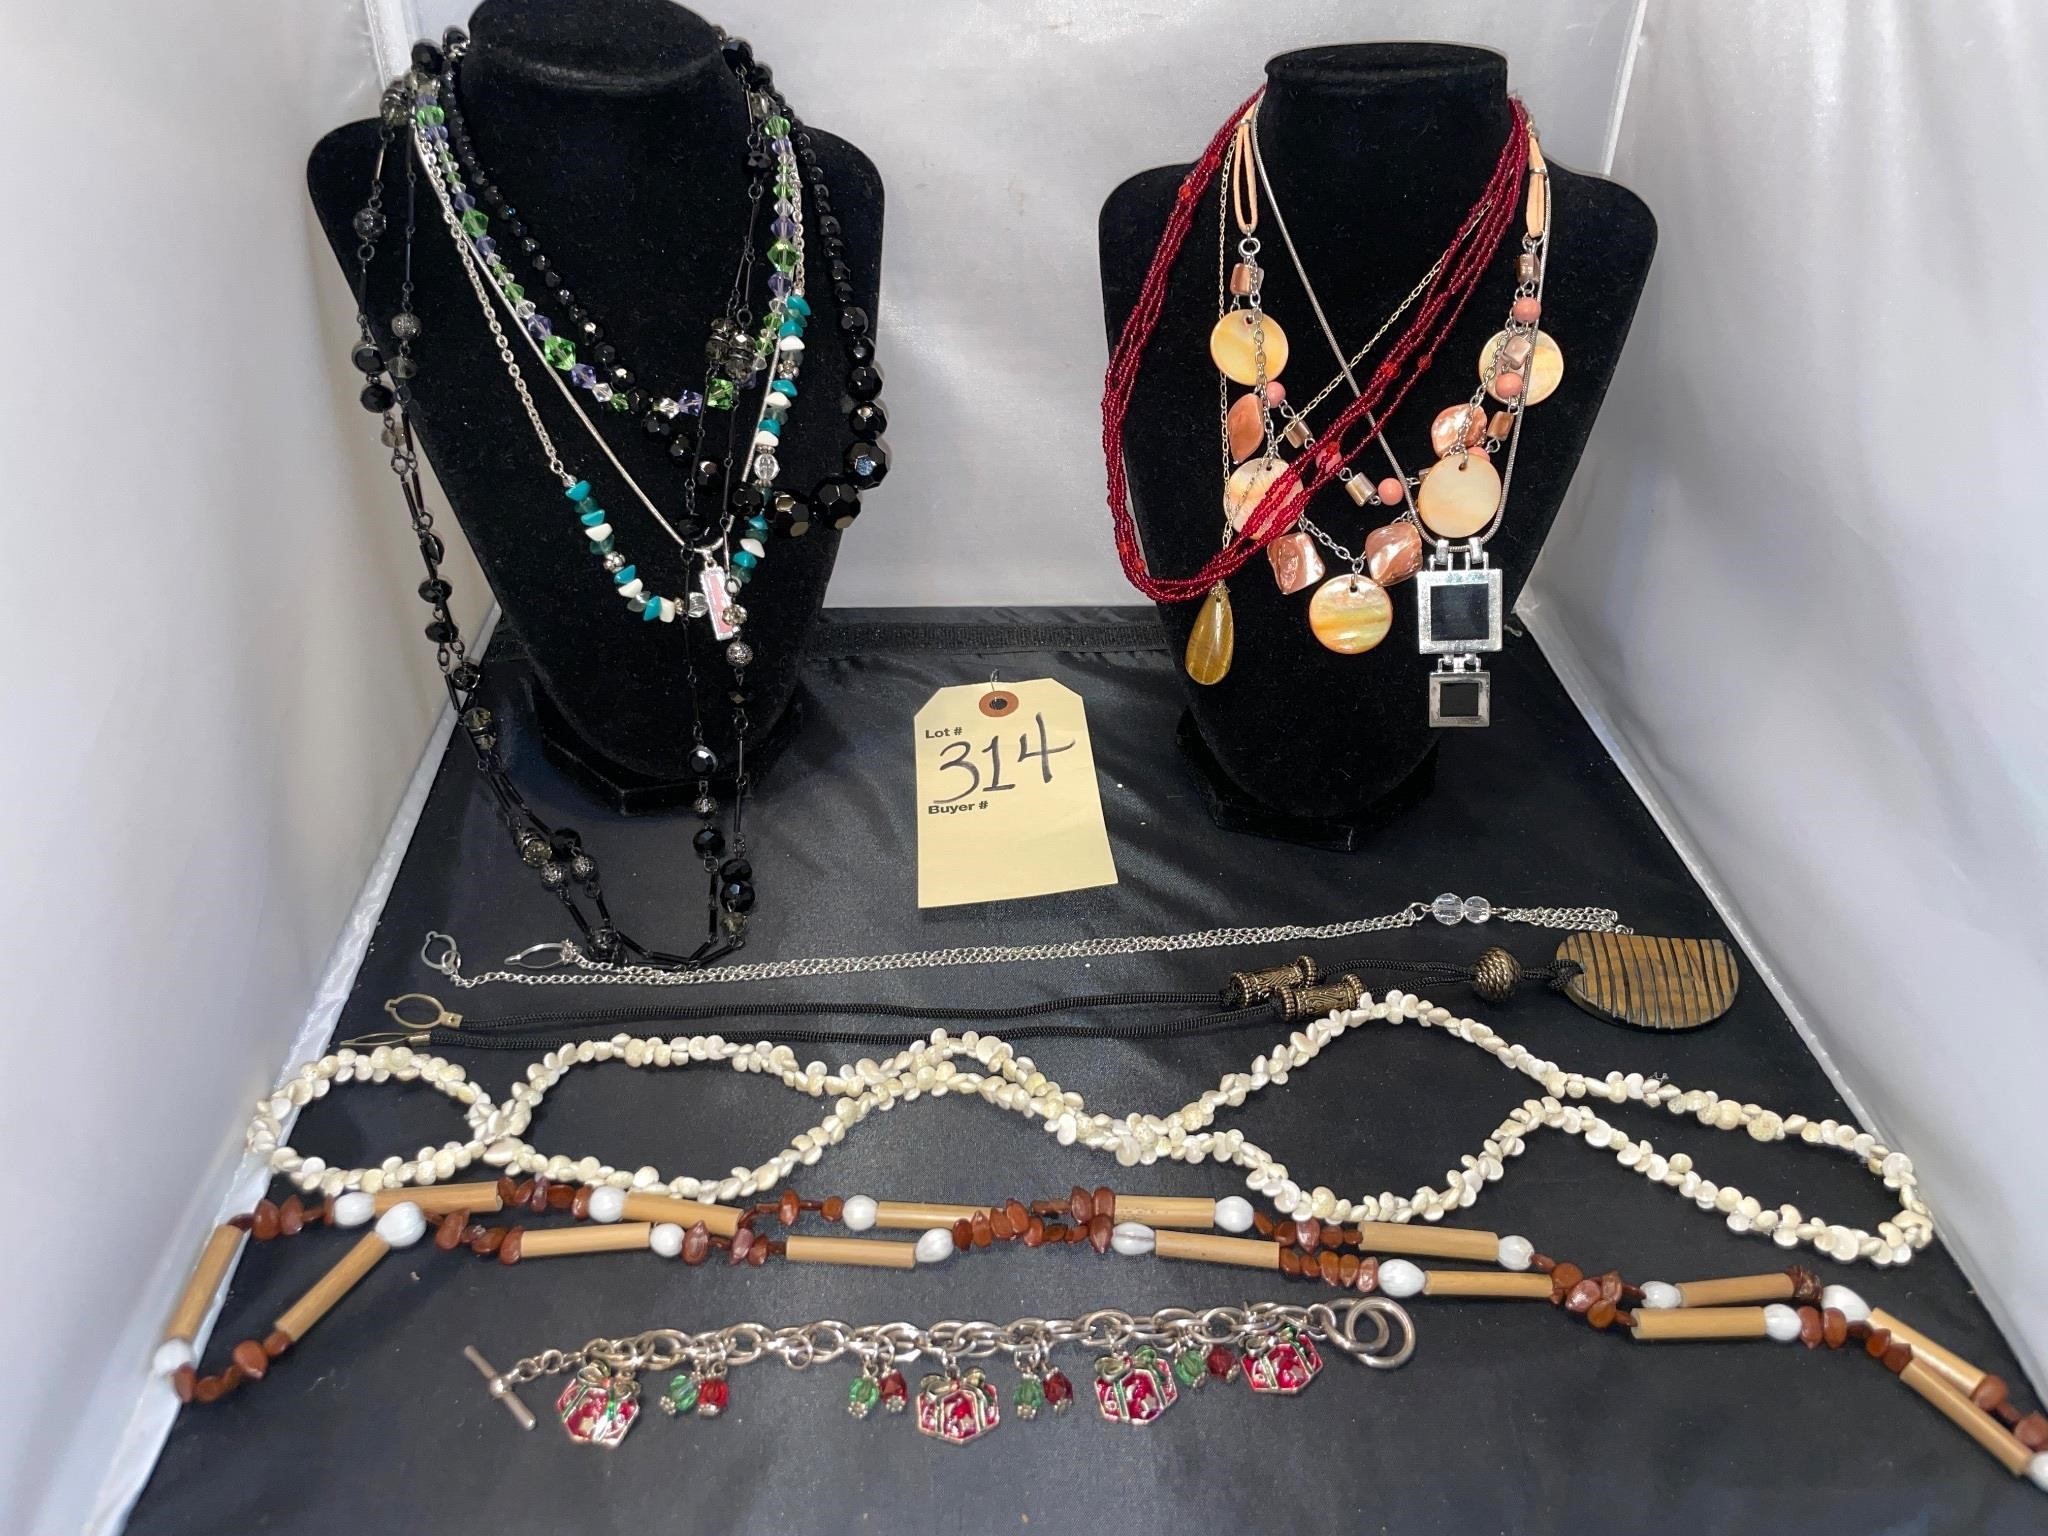 HUGE DOWNSIZING CONSIGNMENT SPRING FINAL AUCTION PART II